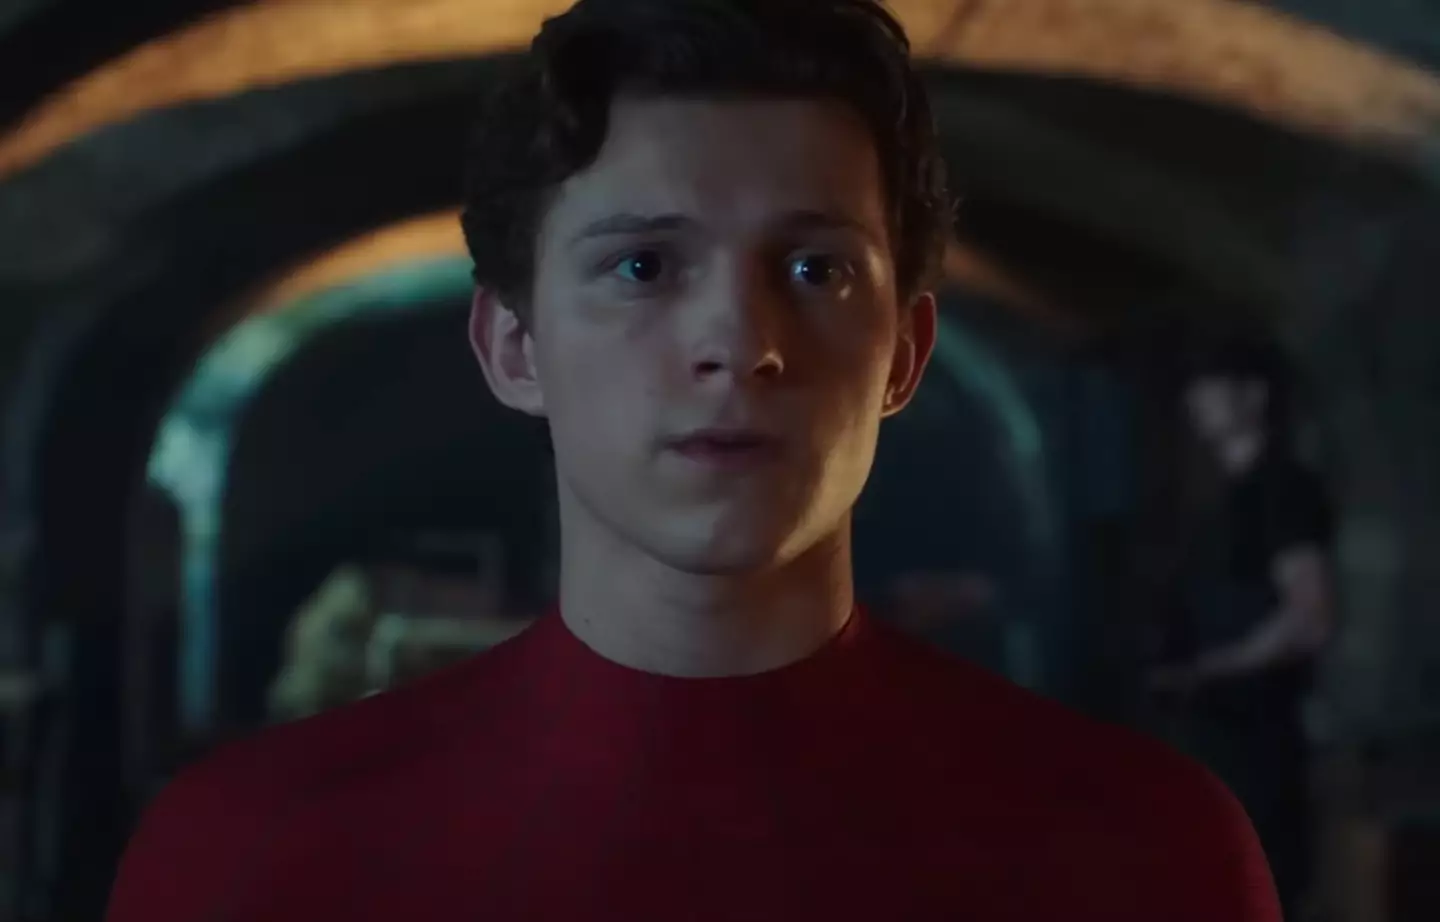 Tom Holland has played Spider-Man since 2016.